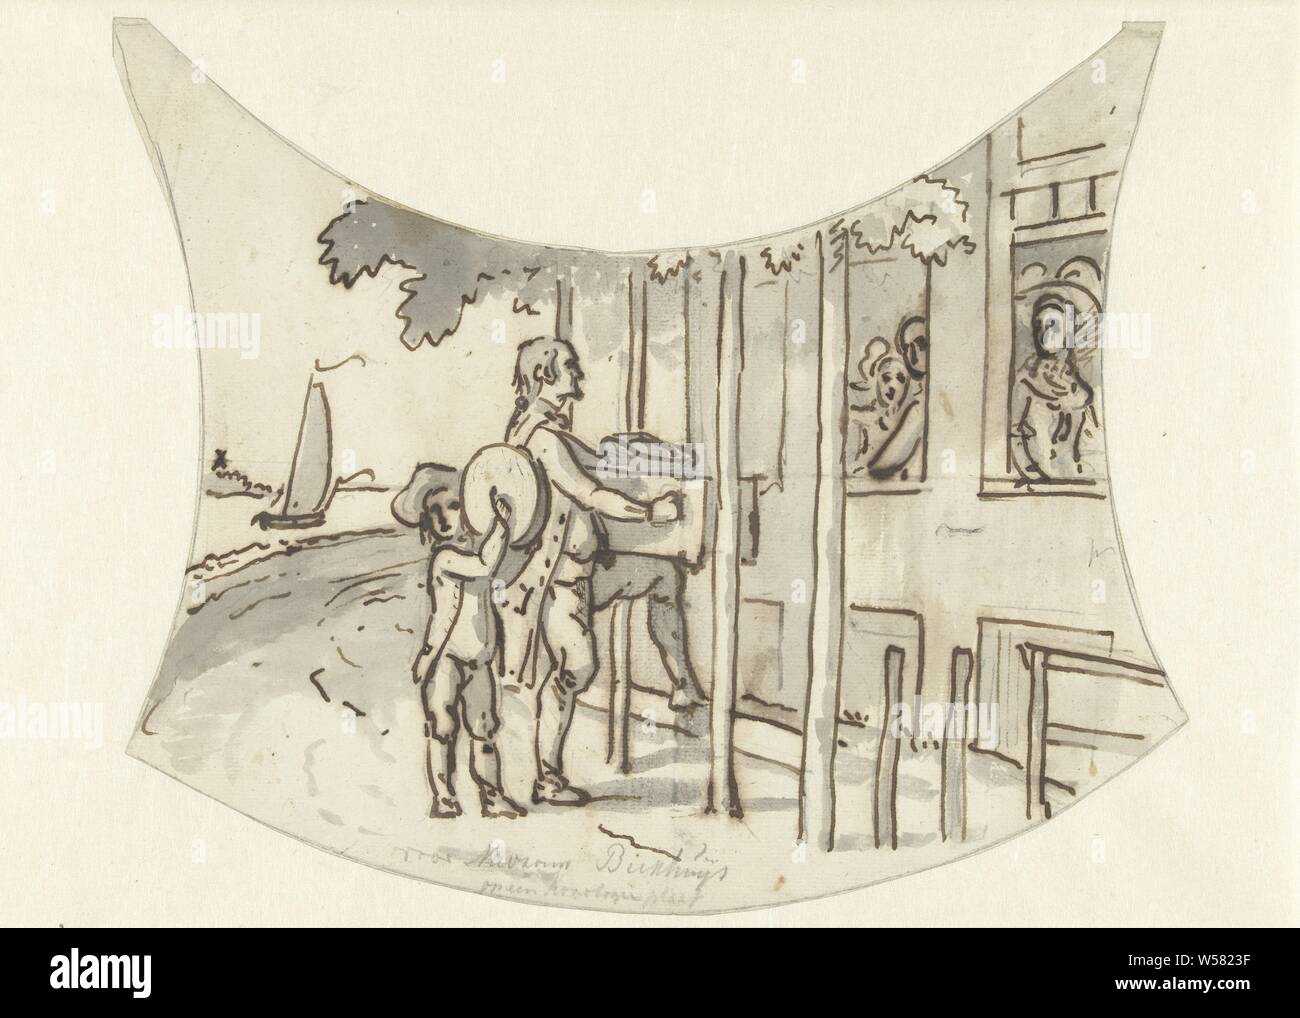 Design for the plate of a clock with an organ man for a house, Design for a timepiece., barrel-organ player, Jurriaan Andriessen, c. 1752 - c. 1819, paper, ink, graphite (mineral), brush, h 240 mm × w 290 mm Stock Photo